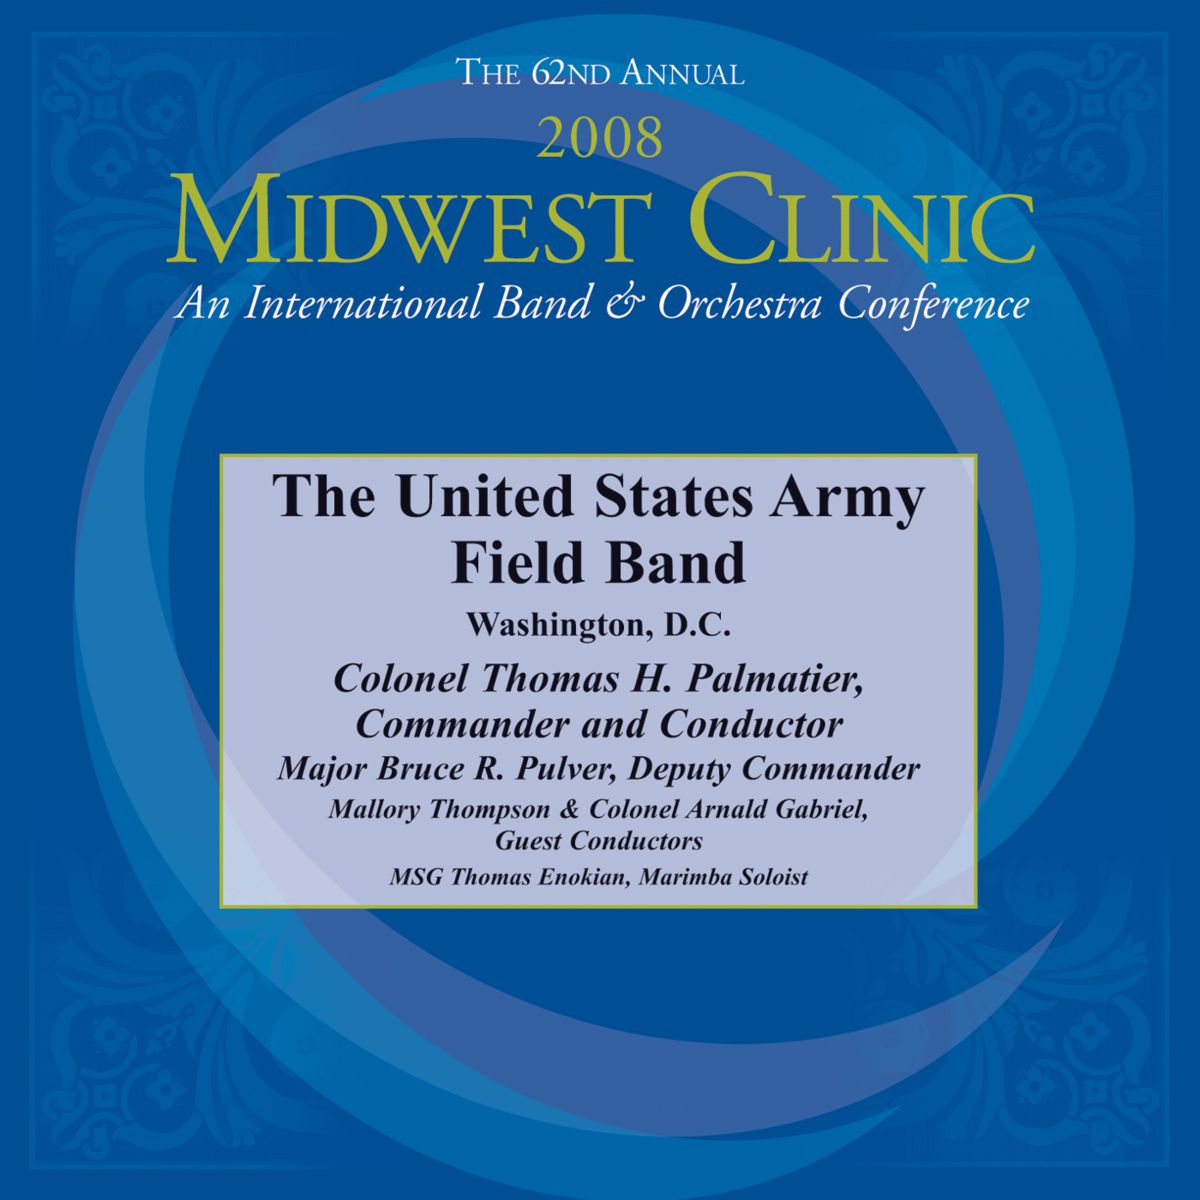 2008 Midwest Clinic: The United States Army Field Band - hacer clic aqu